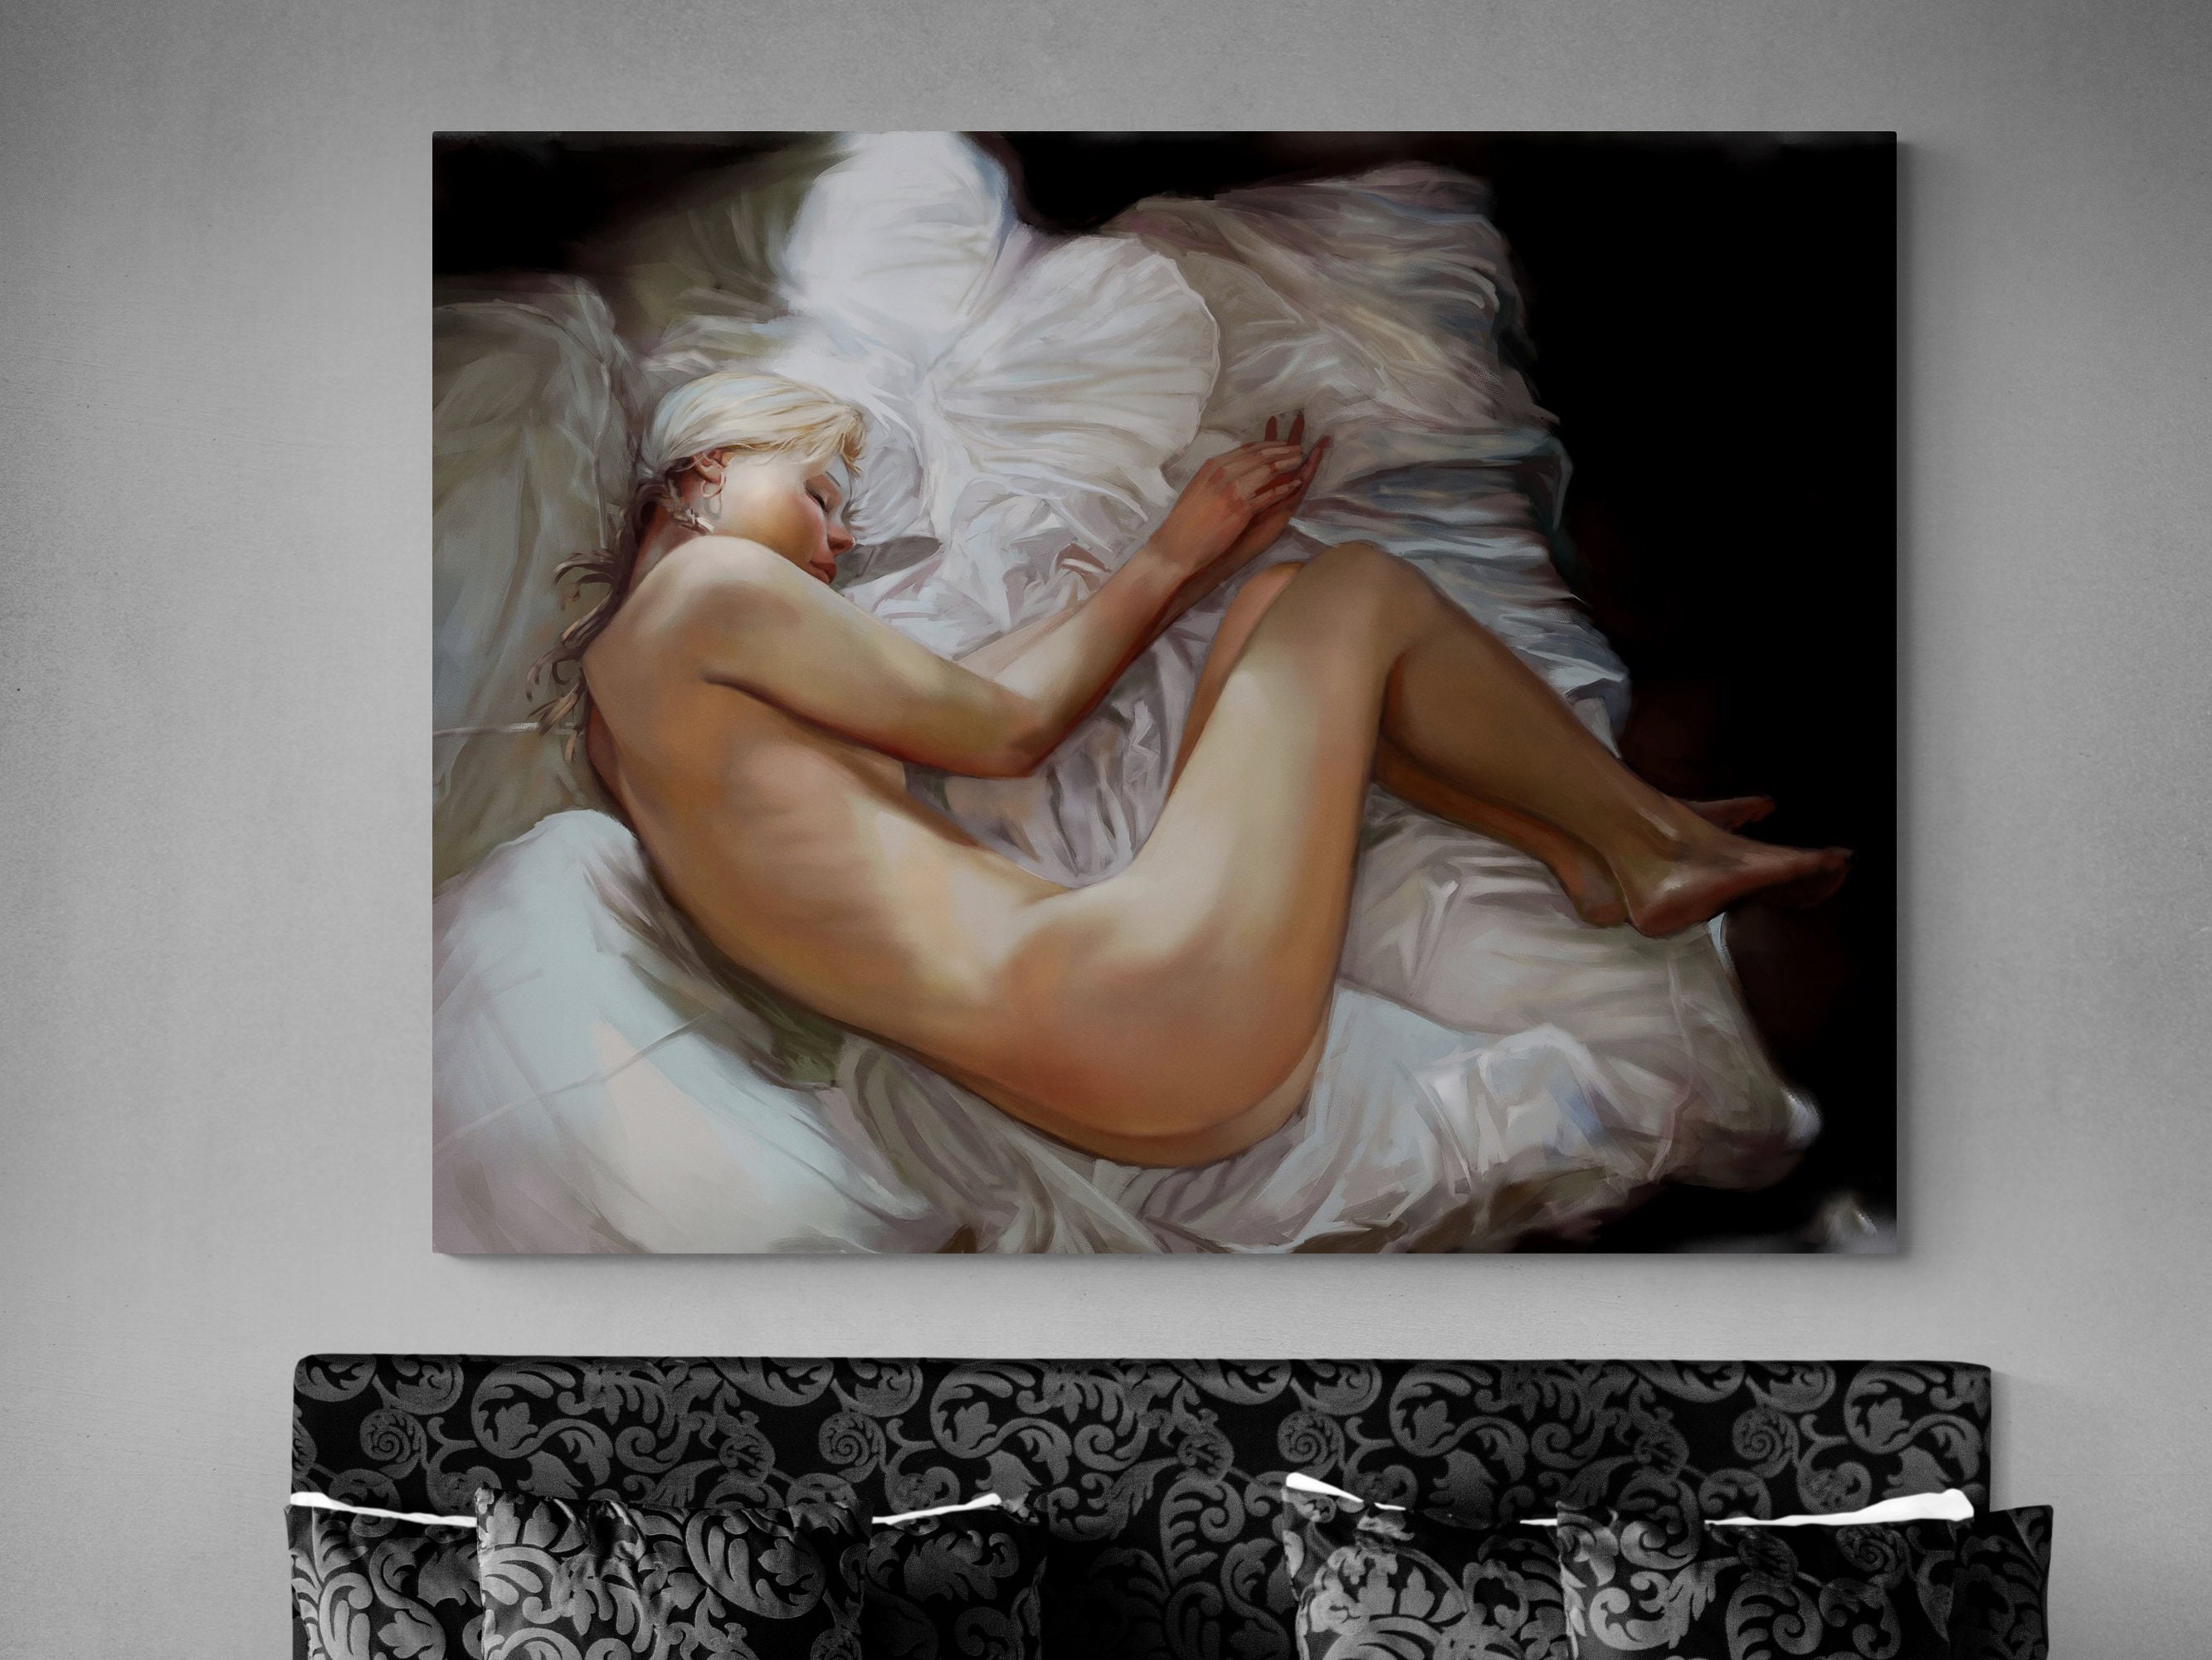 Naked Sexy Girl Print on Bedroom Wall Art Canvas Figurative pic